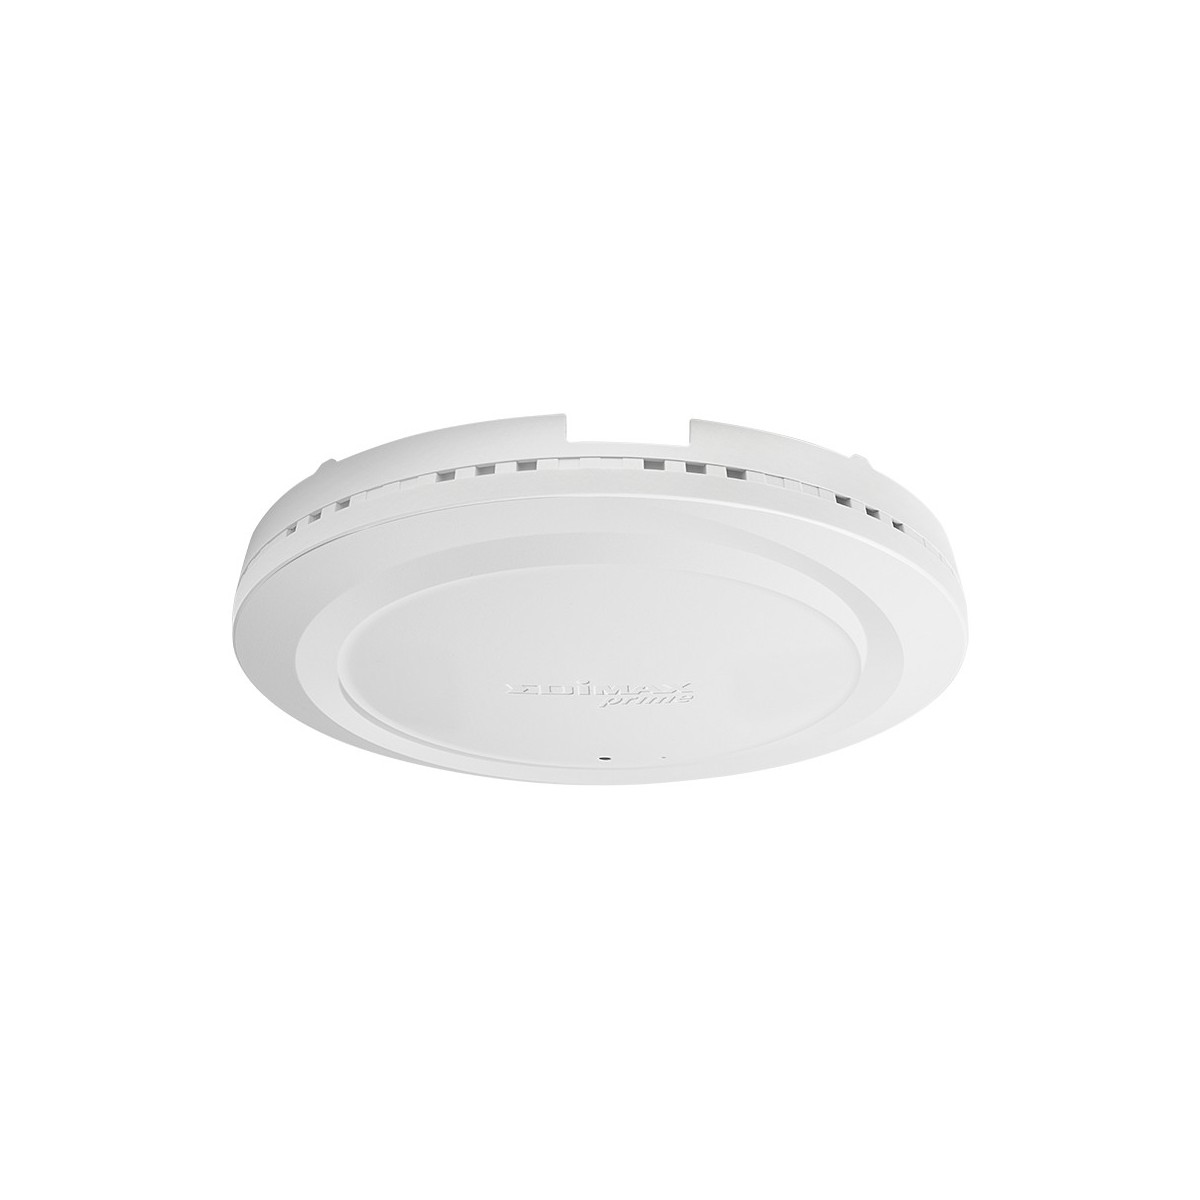 Edimax AX1800 DUAL-BAND CEILING MOUNT POE - 574 Mbit/s - 1201 Mbit/s - 10,100,1000 Mbit/s - IEEE 802.11a,IEEE 802.11ac,IEEE 802.